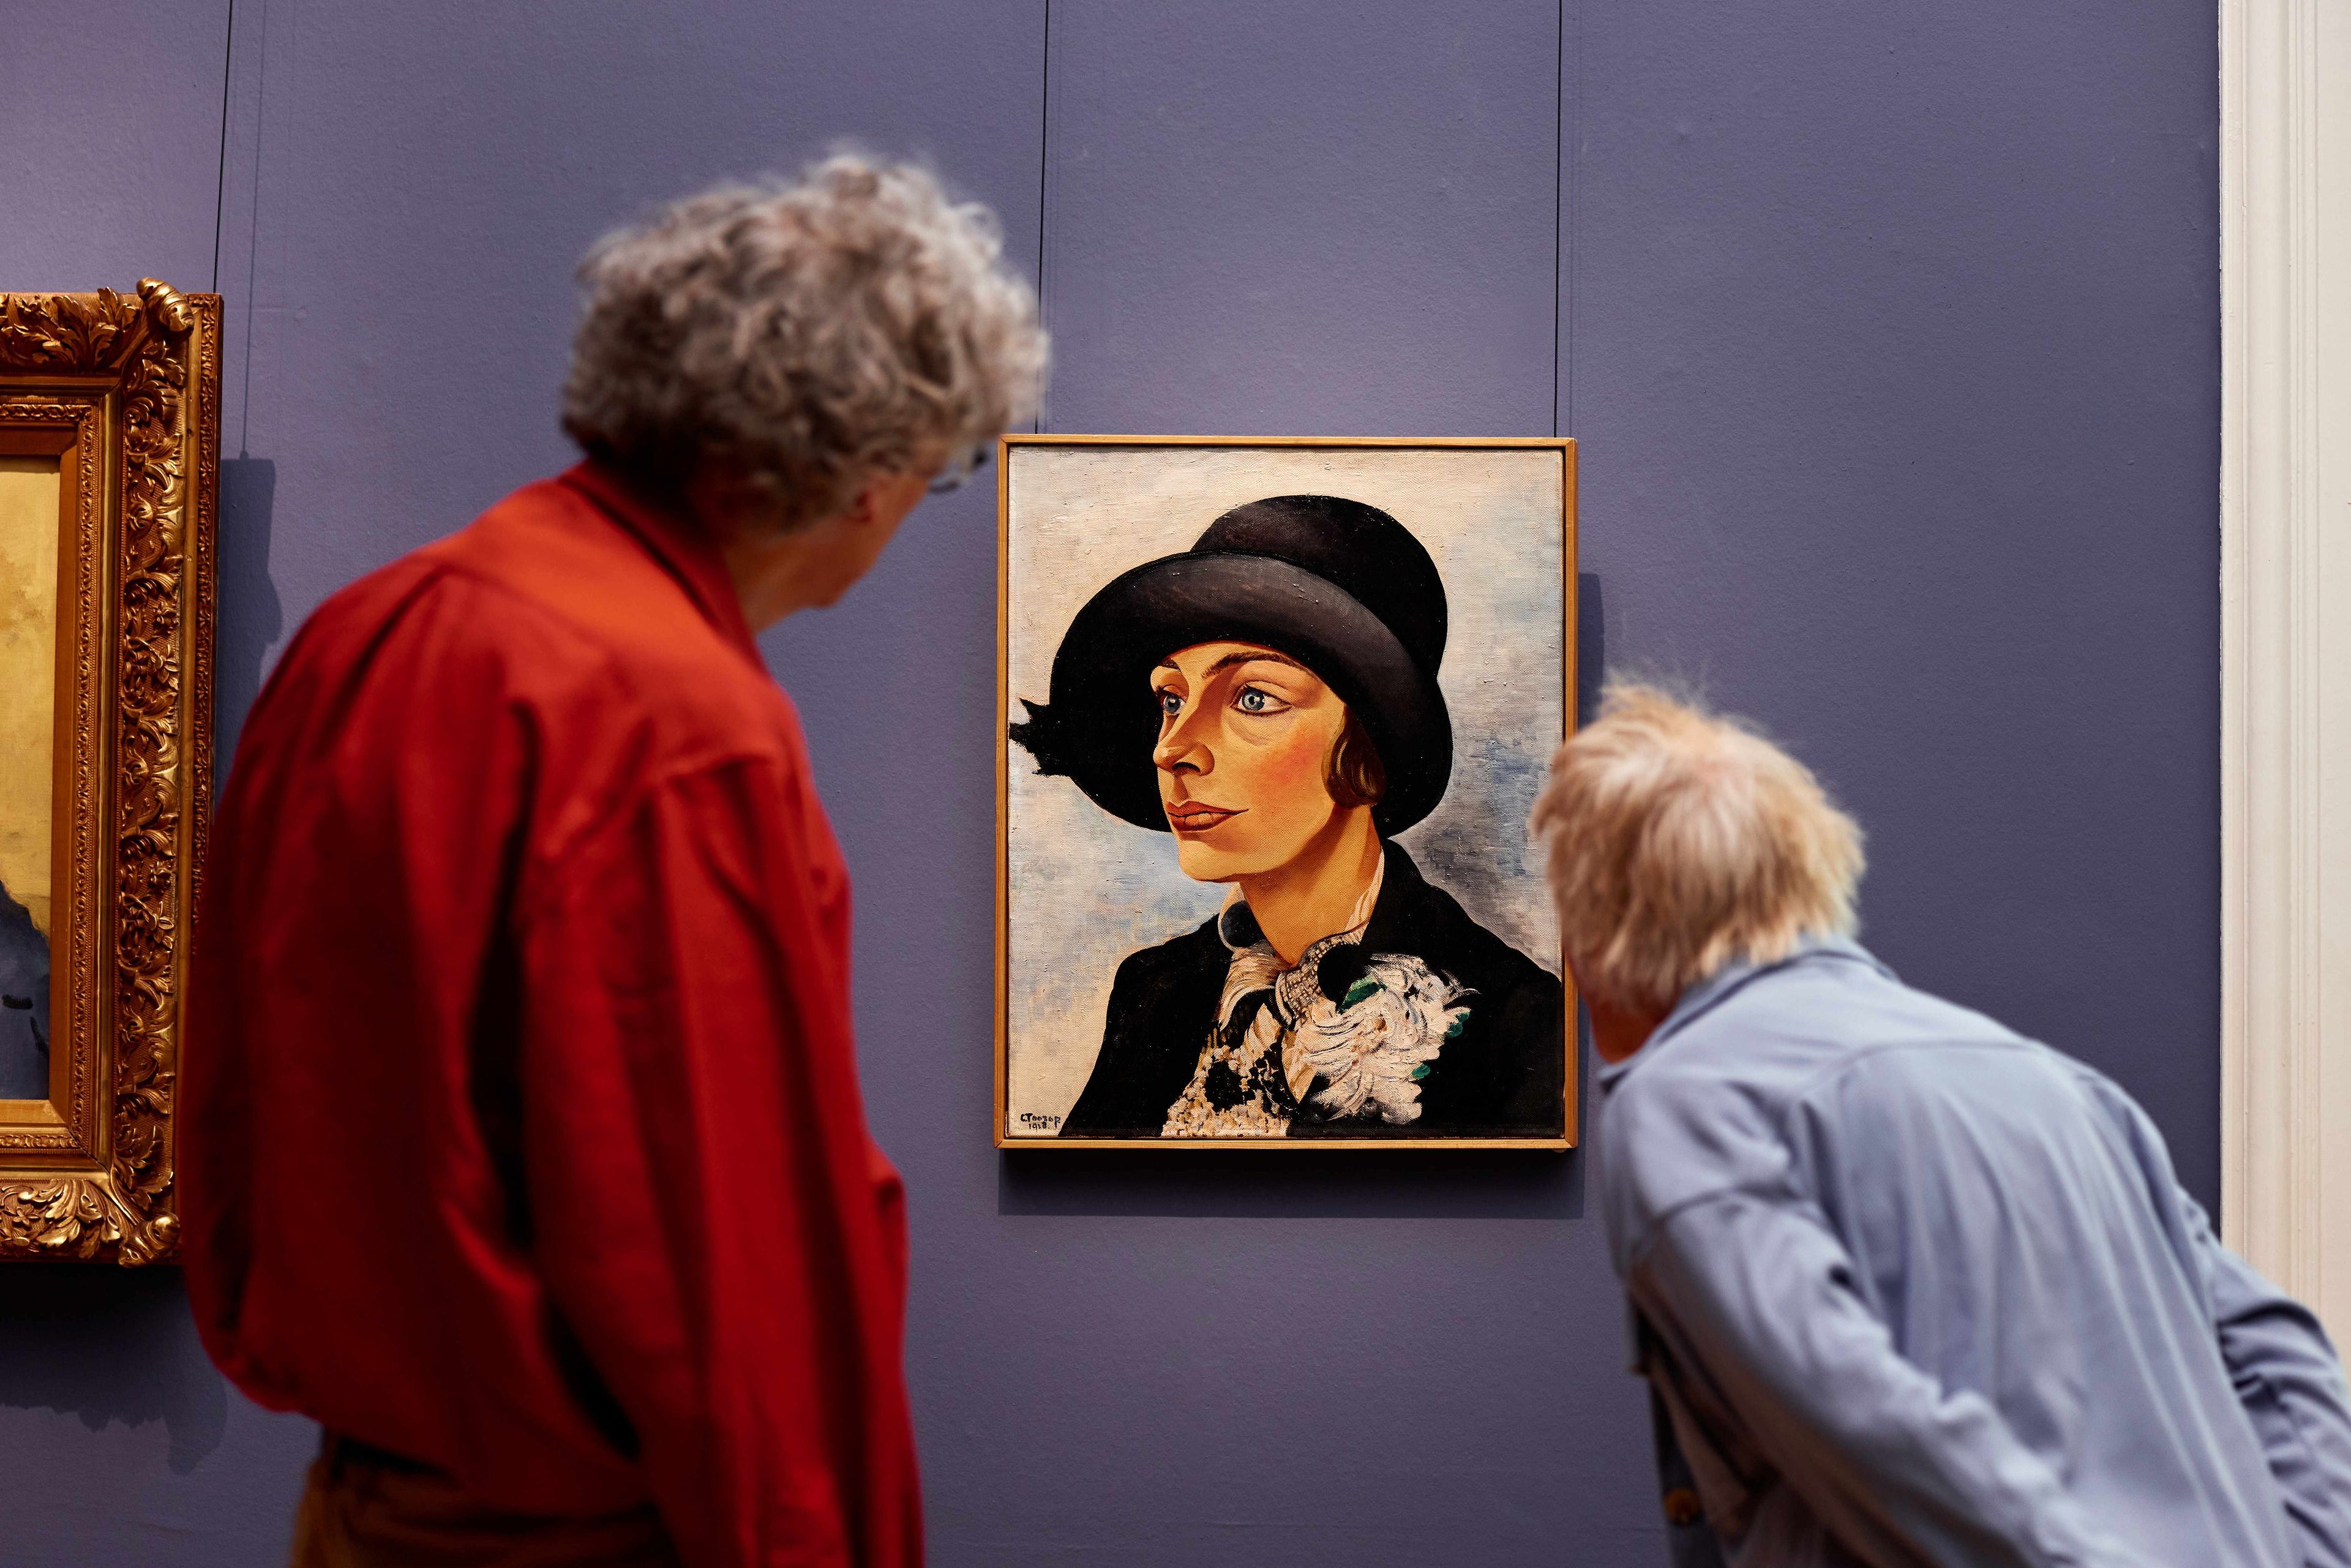 Two visitors looking at ‘Portrait of a Lady with a Black Hat’ by Charley Toorop in the Frans Hals Museum.